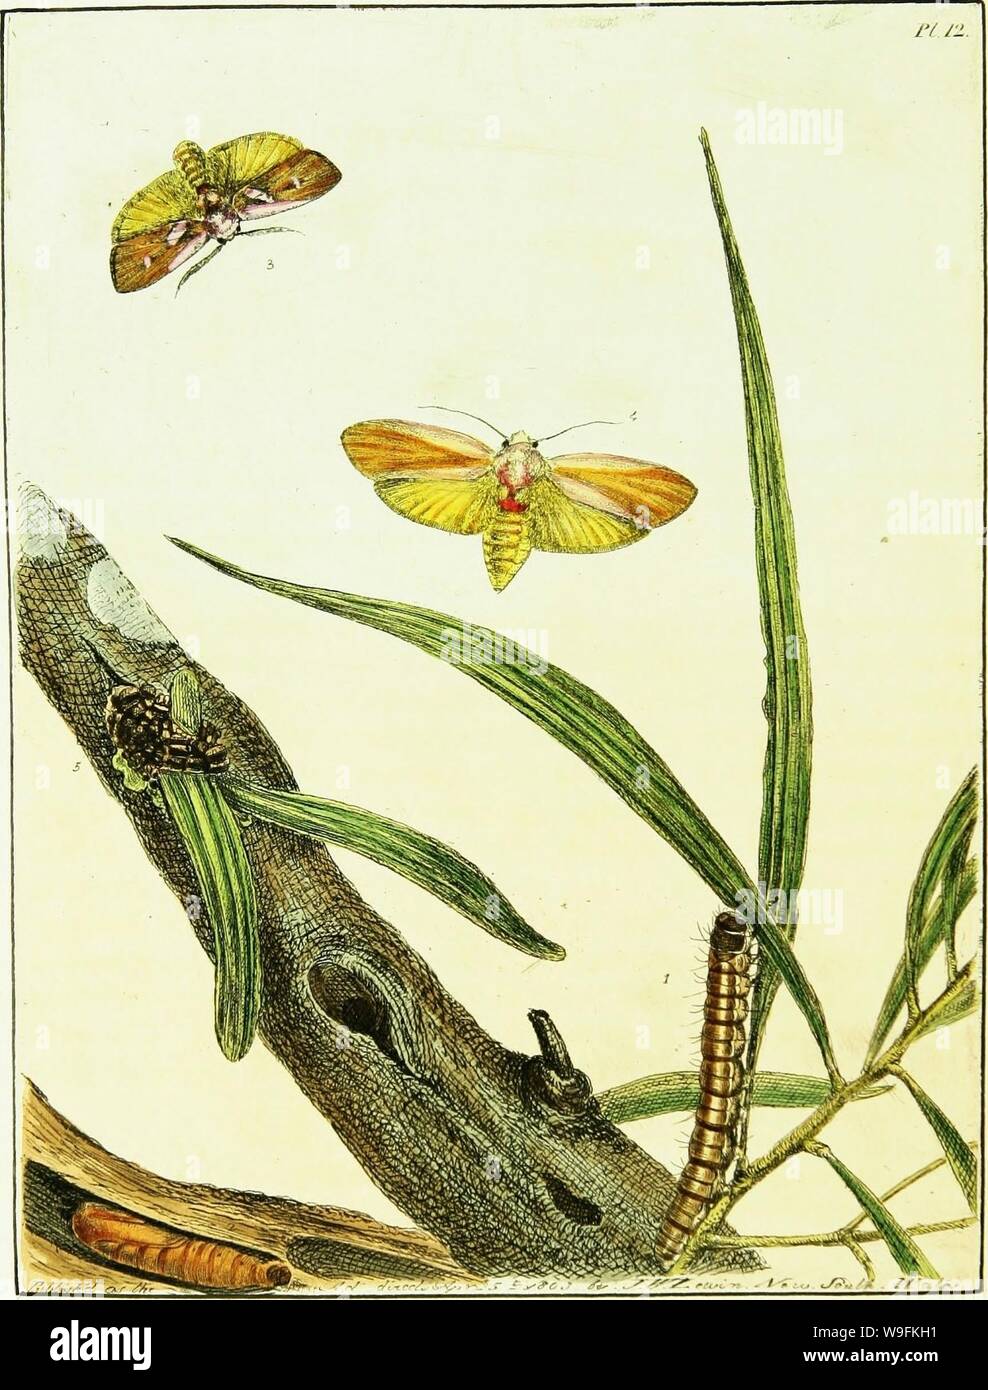 Archive image from page 51 of A natural history of the Stock Photo